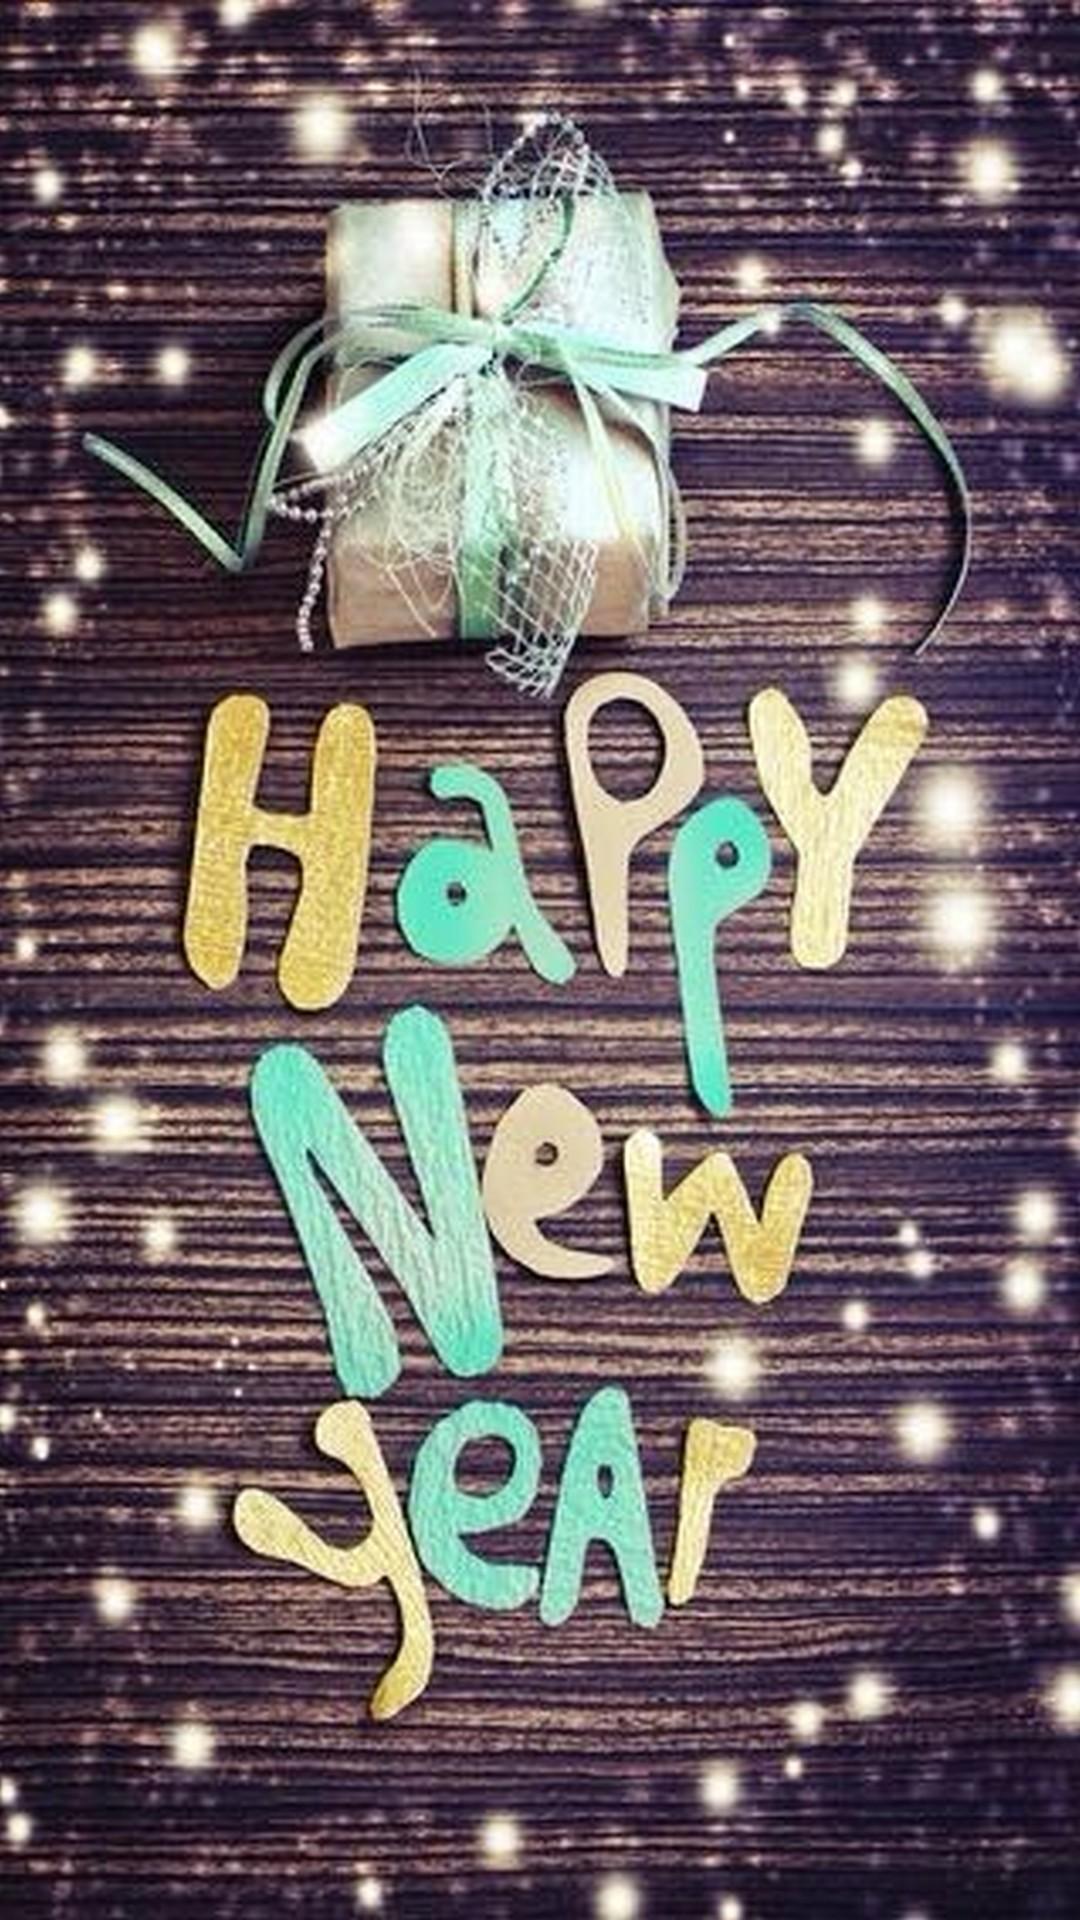 Happy New Year iPhone Wallpaper